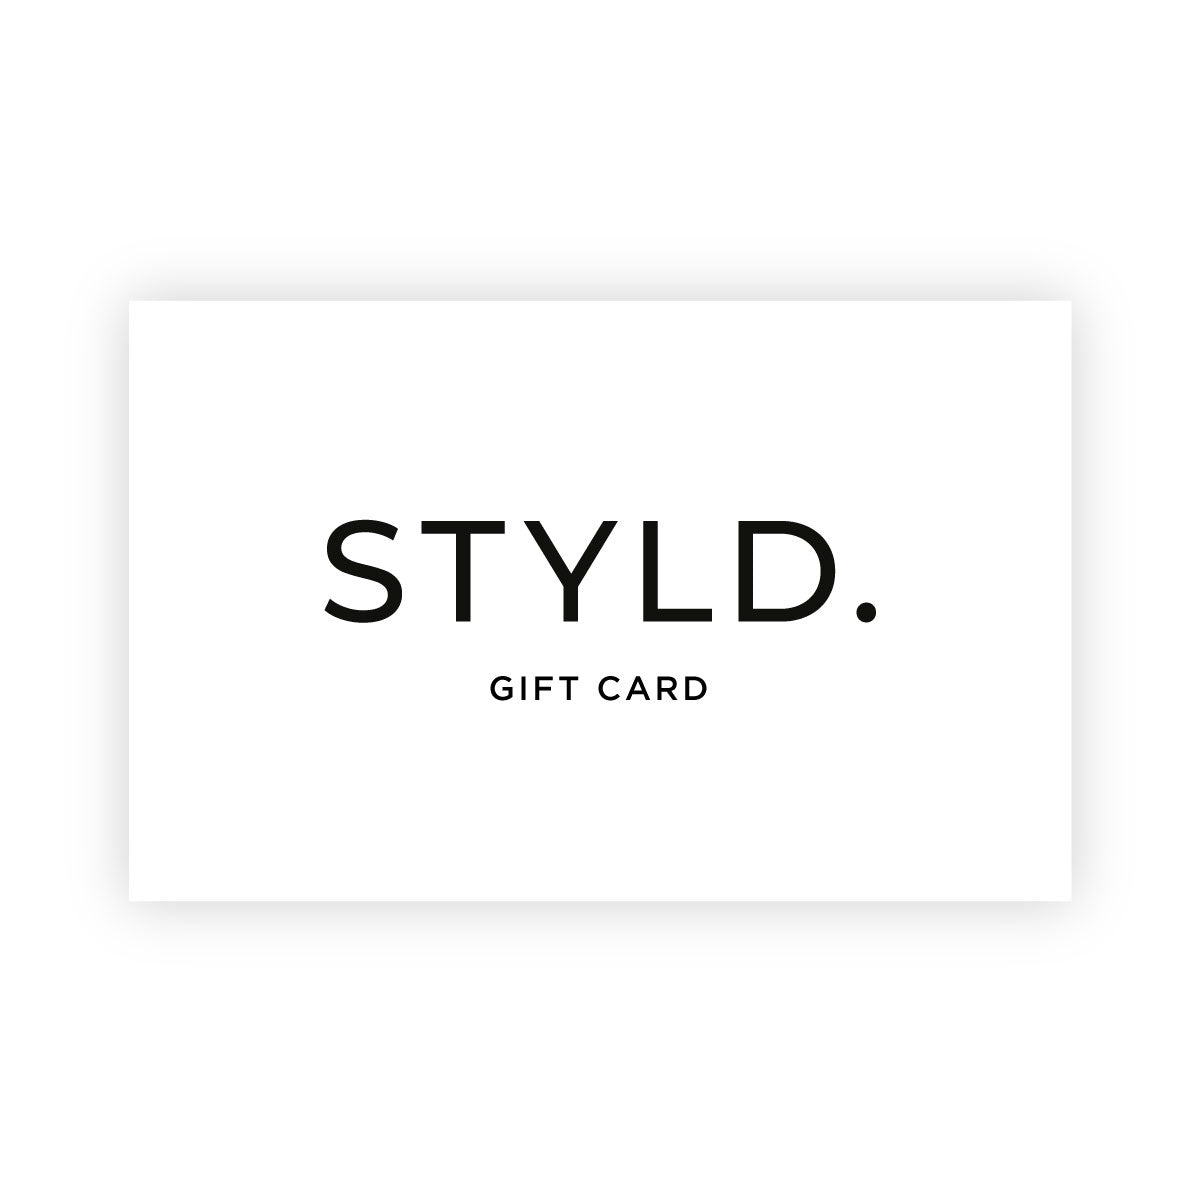 STYLD Gift Card